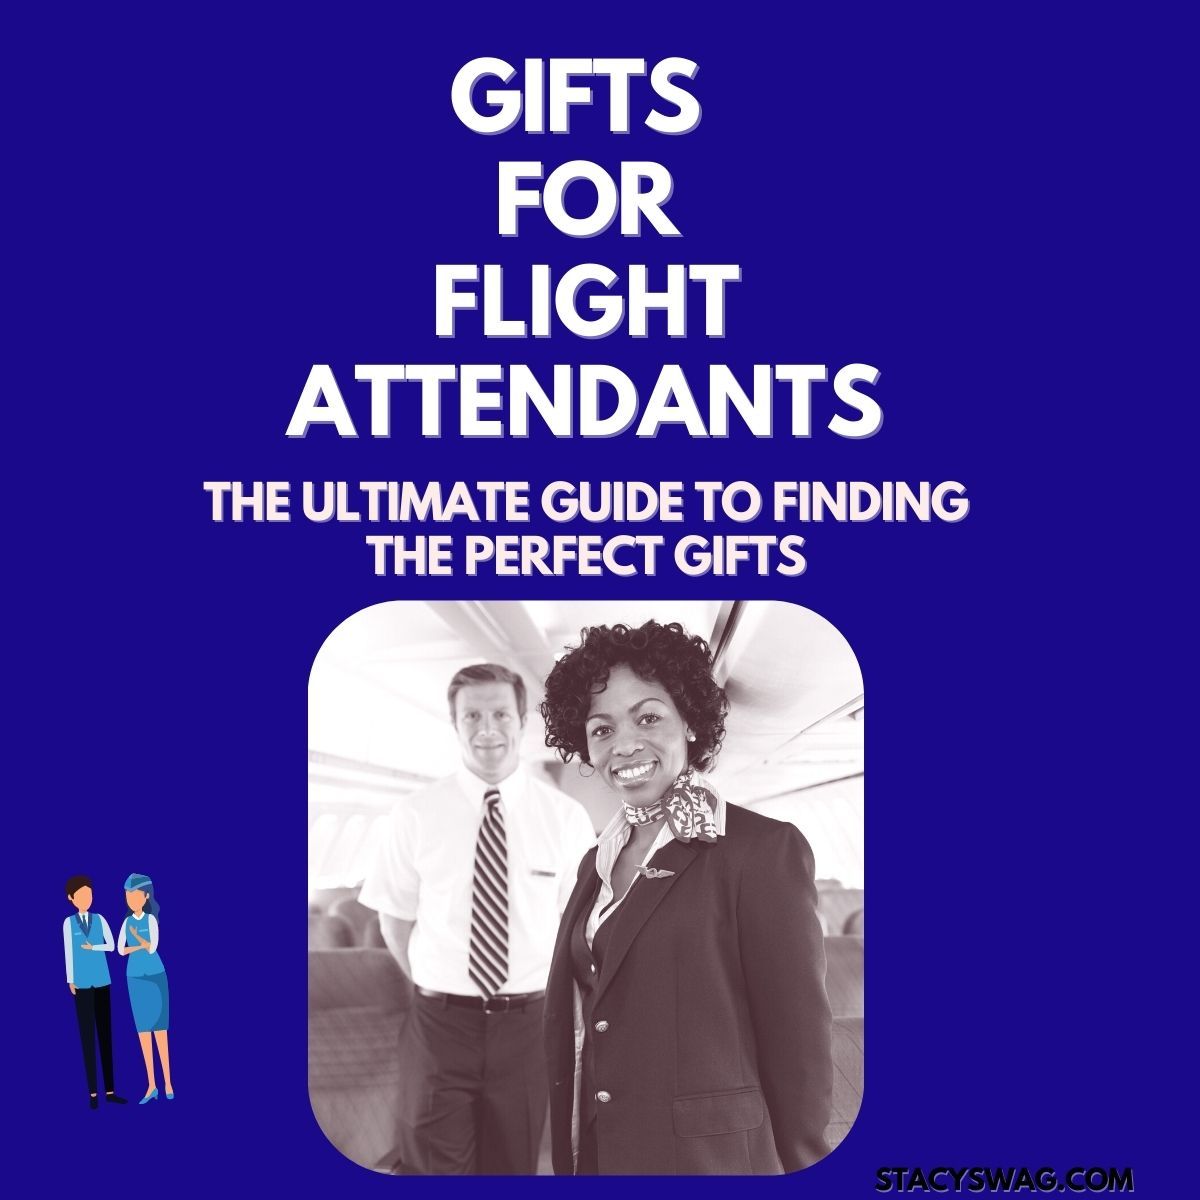 The Ultimate Guide To Finding Gifts For Flight Attendants